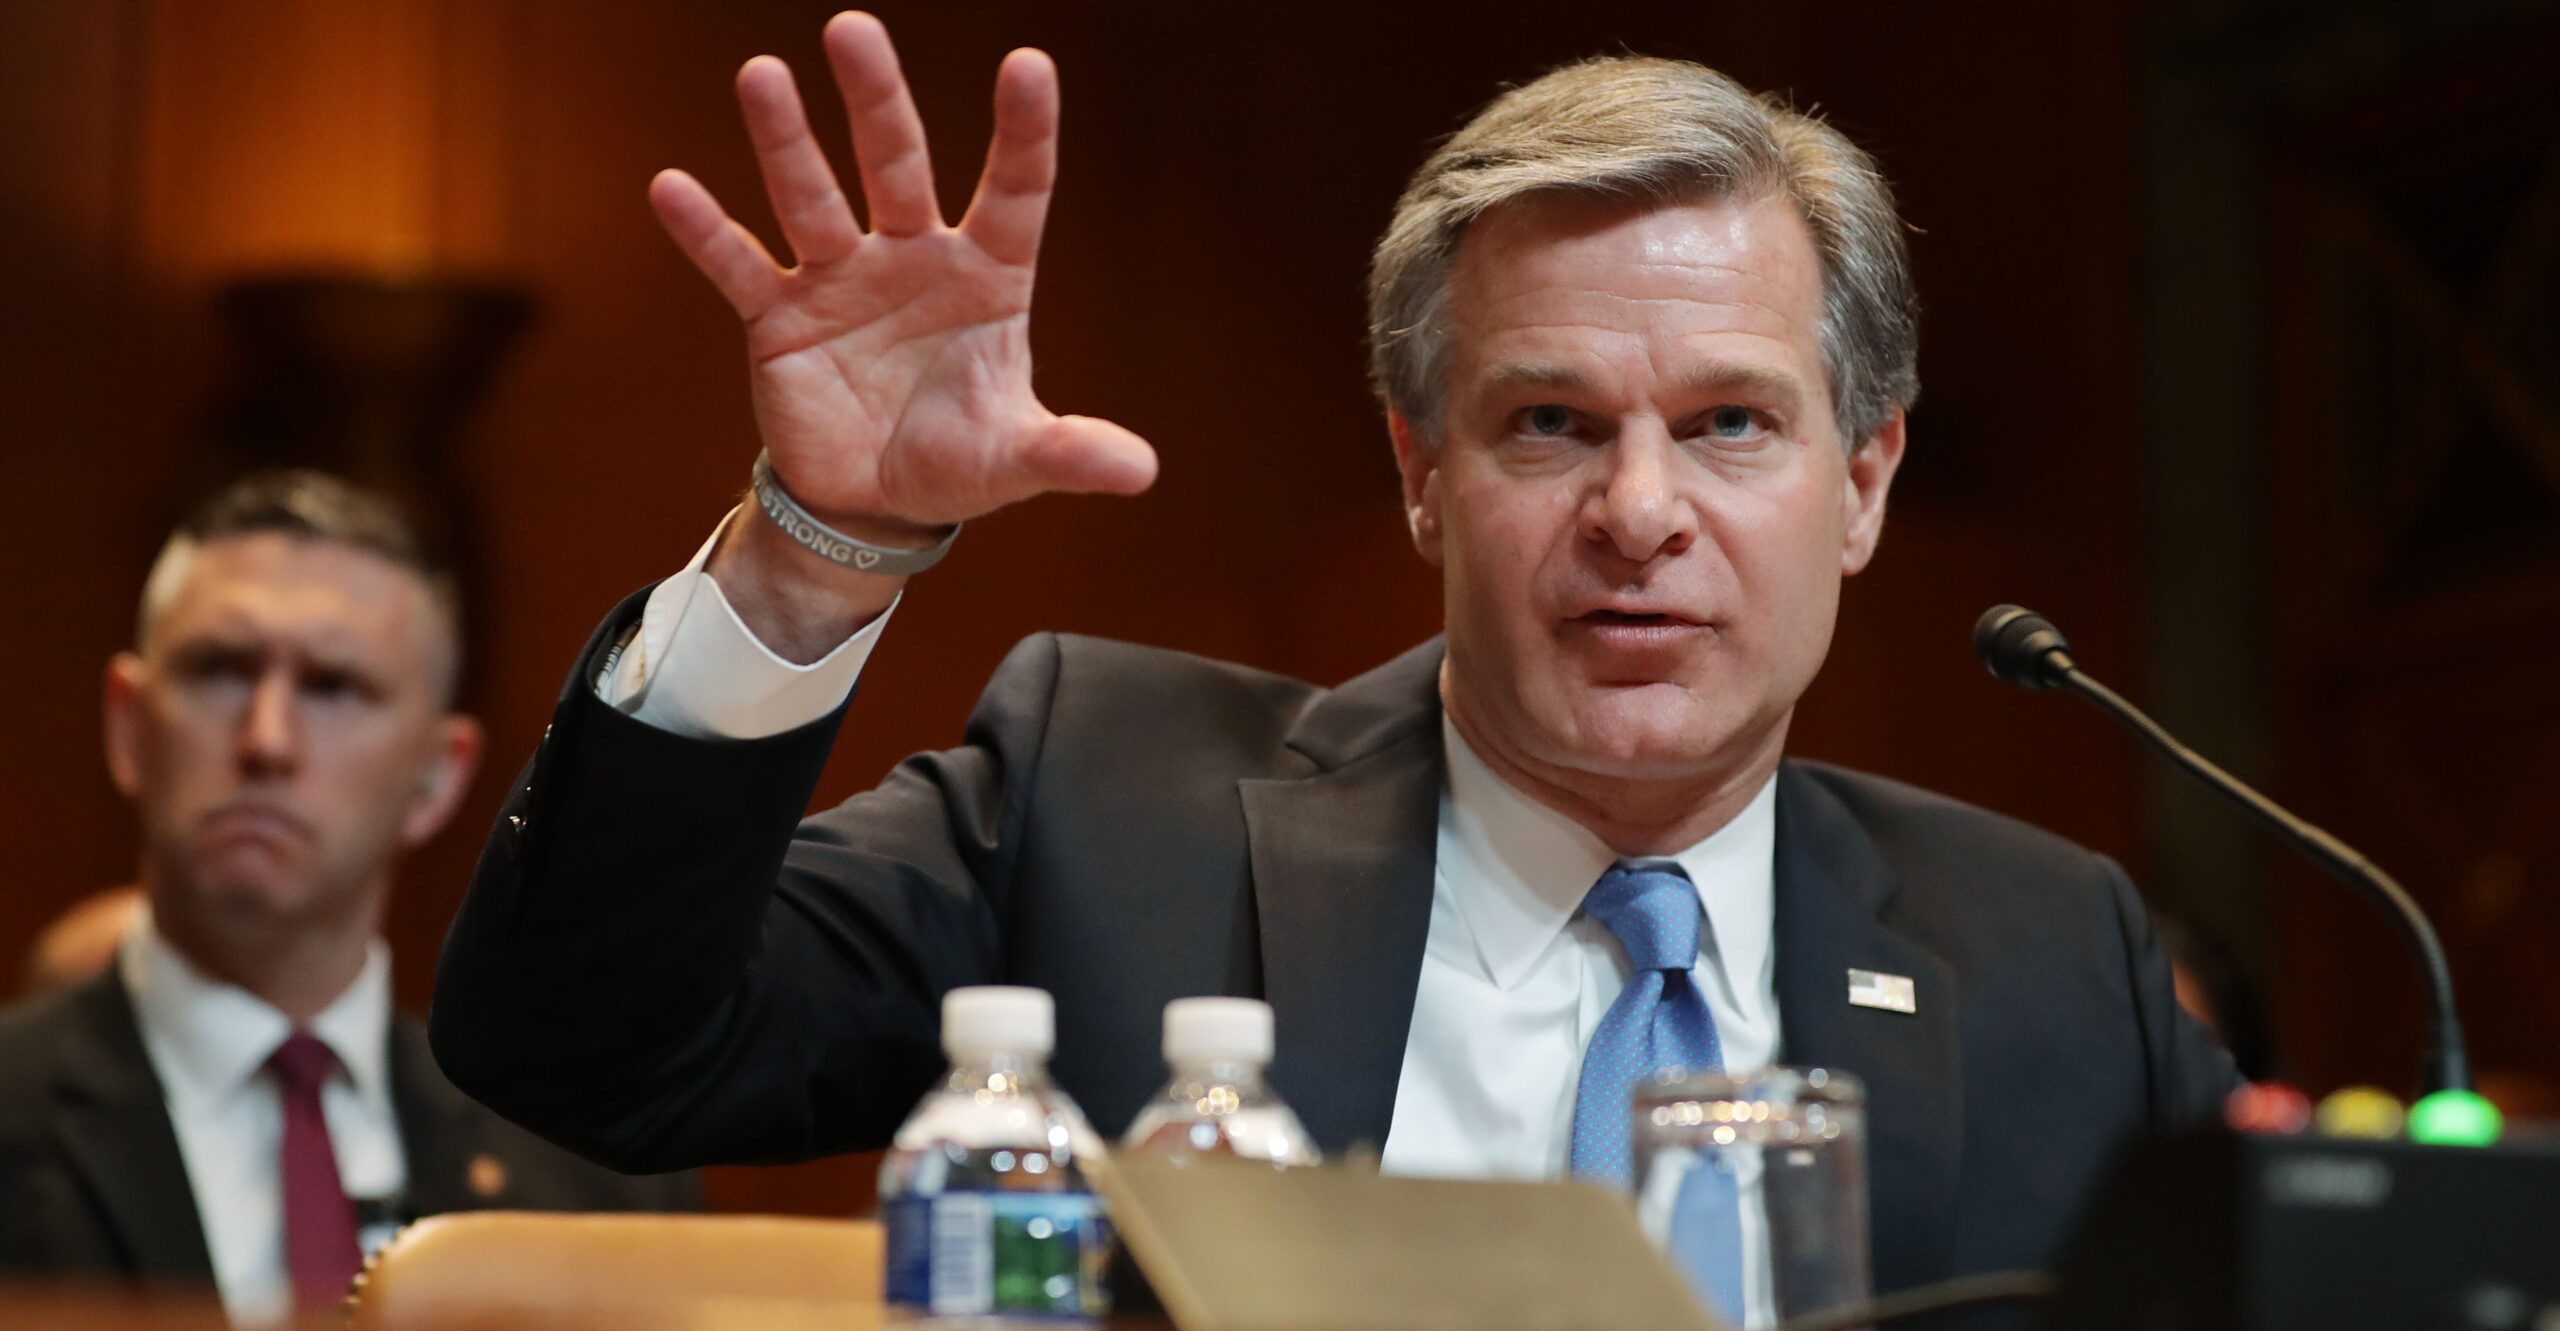 FBI's Wray Fending Off Contempt Citation for Withholding Details of $5M Biden Bribery Allegation From Congress